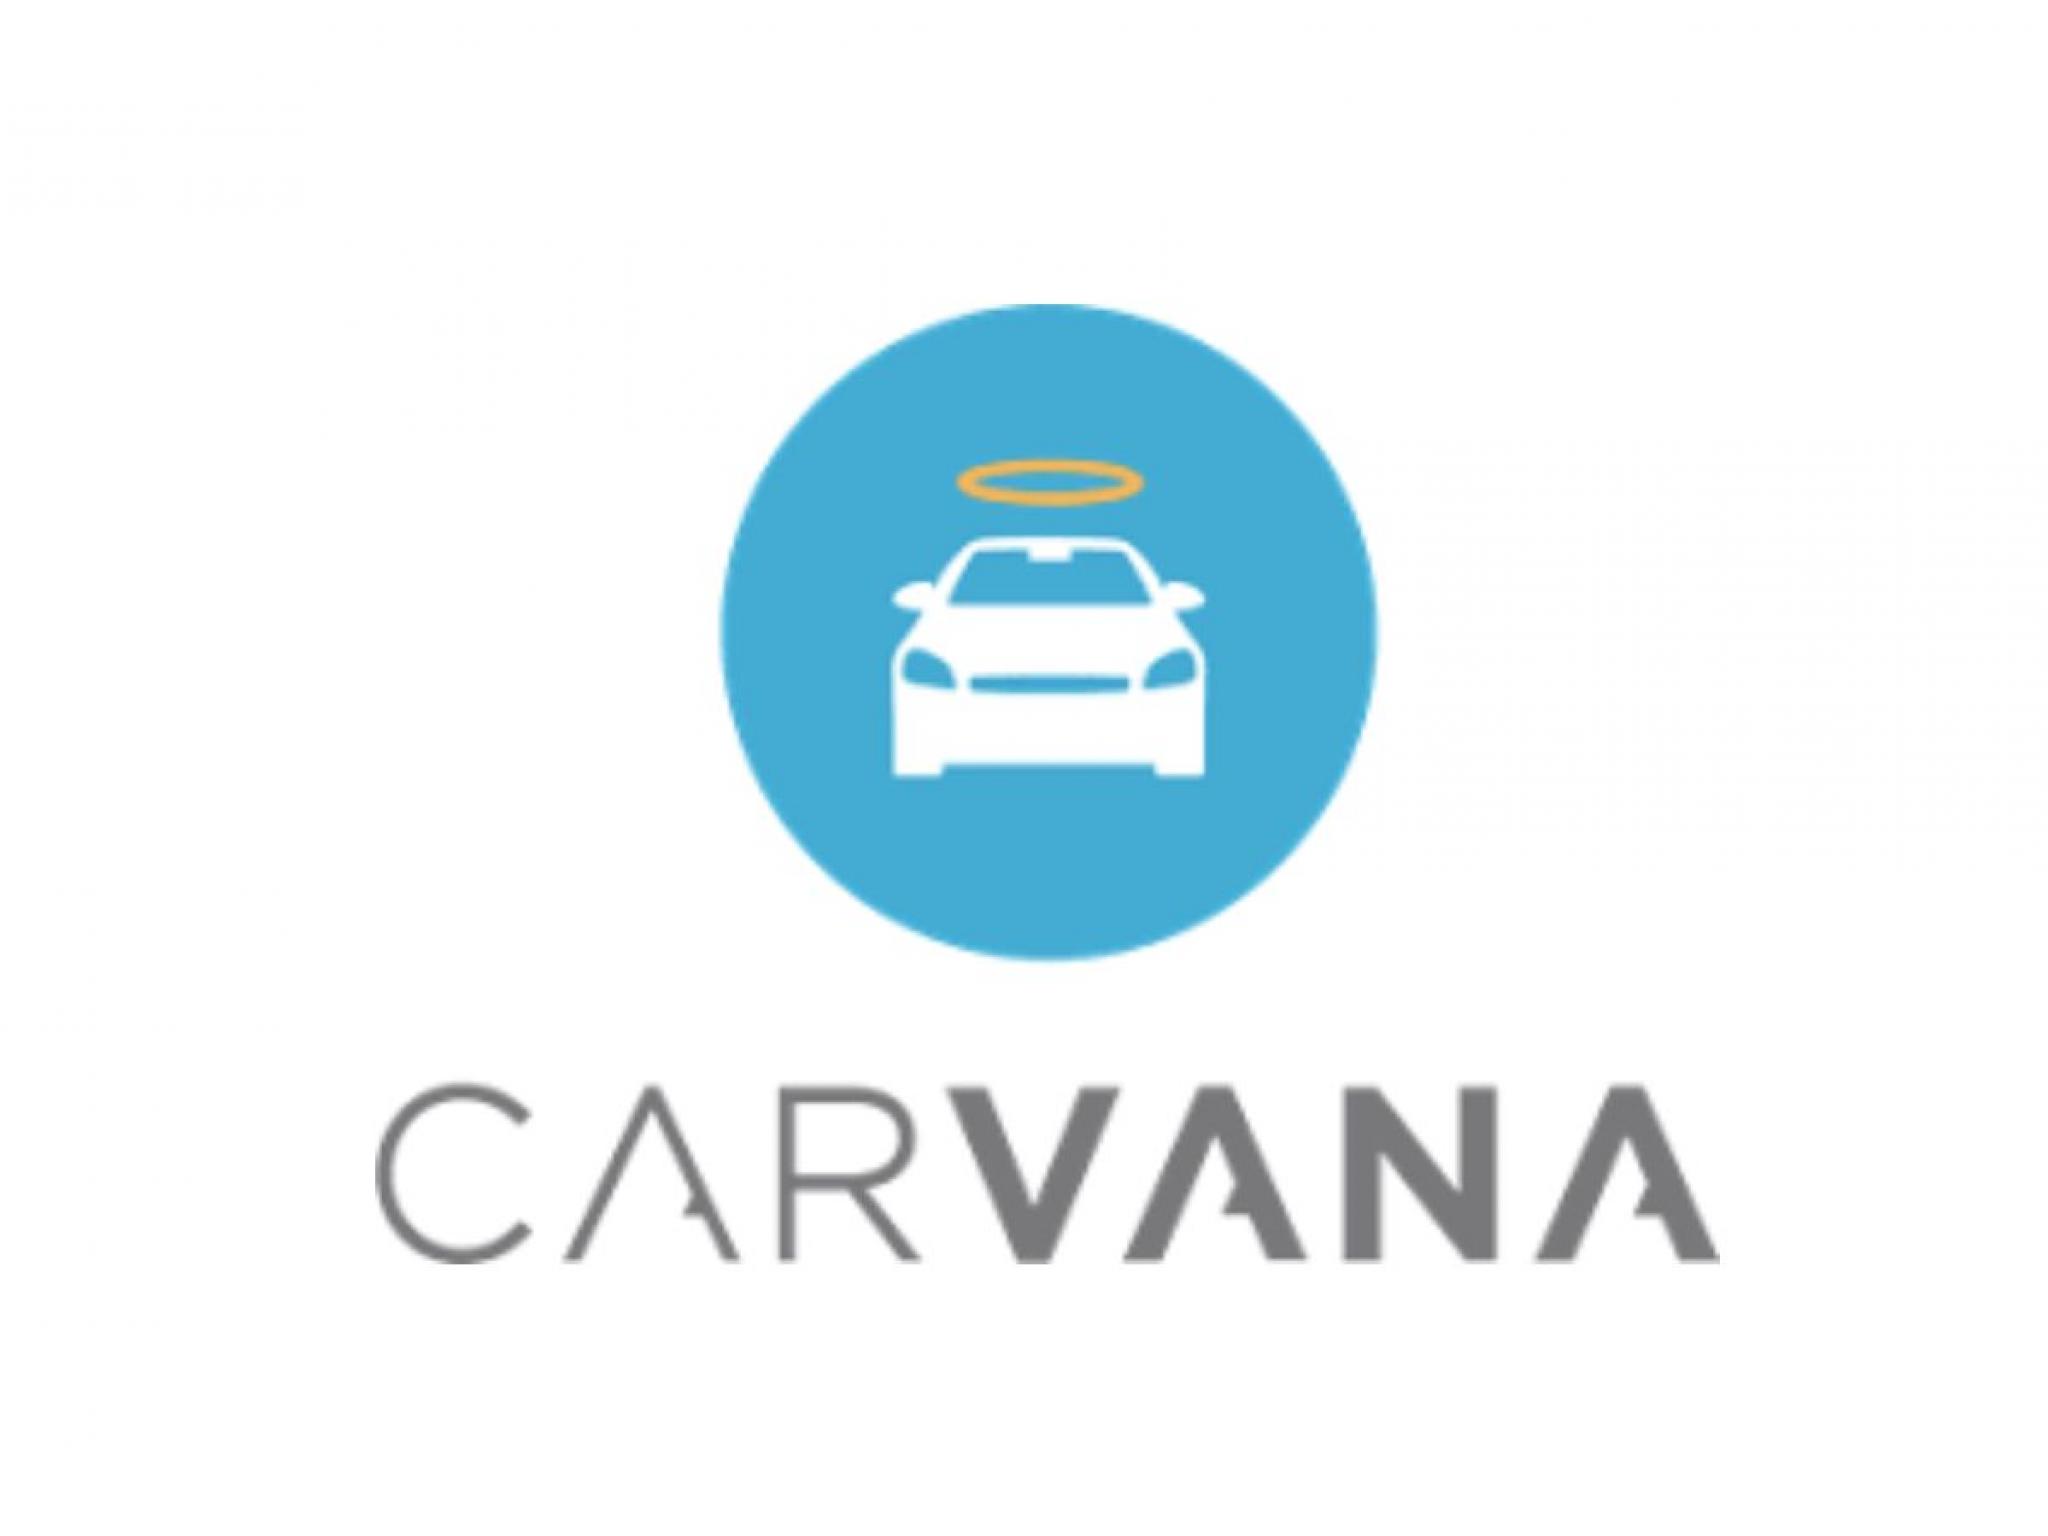  carvana-alaska-air-and-2-other-stocks-insiders-are-selling 